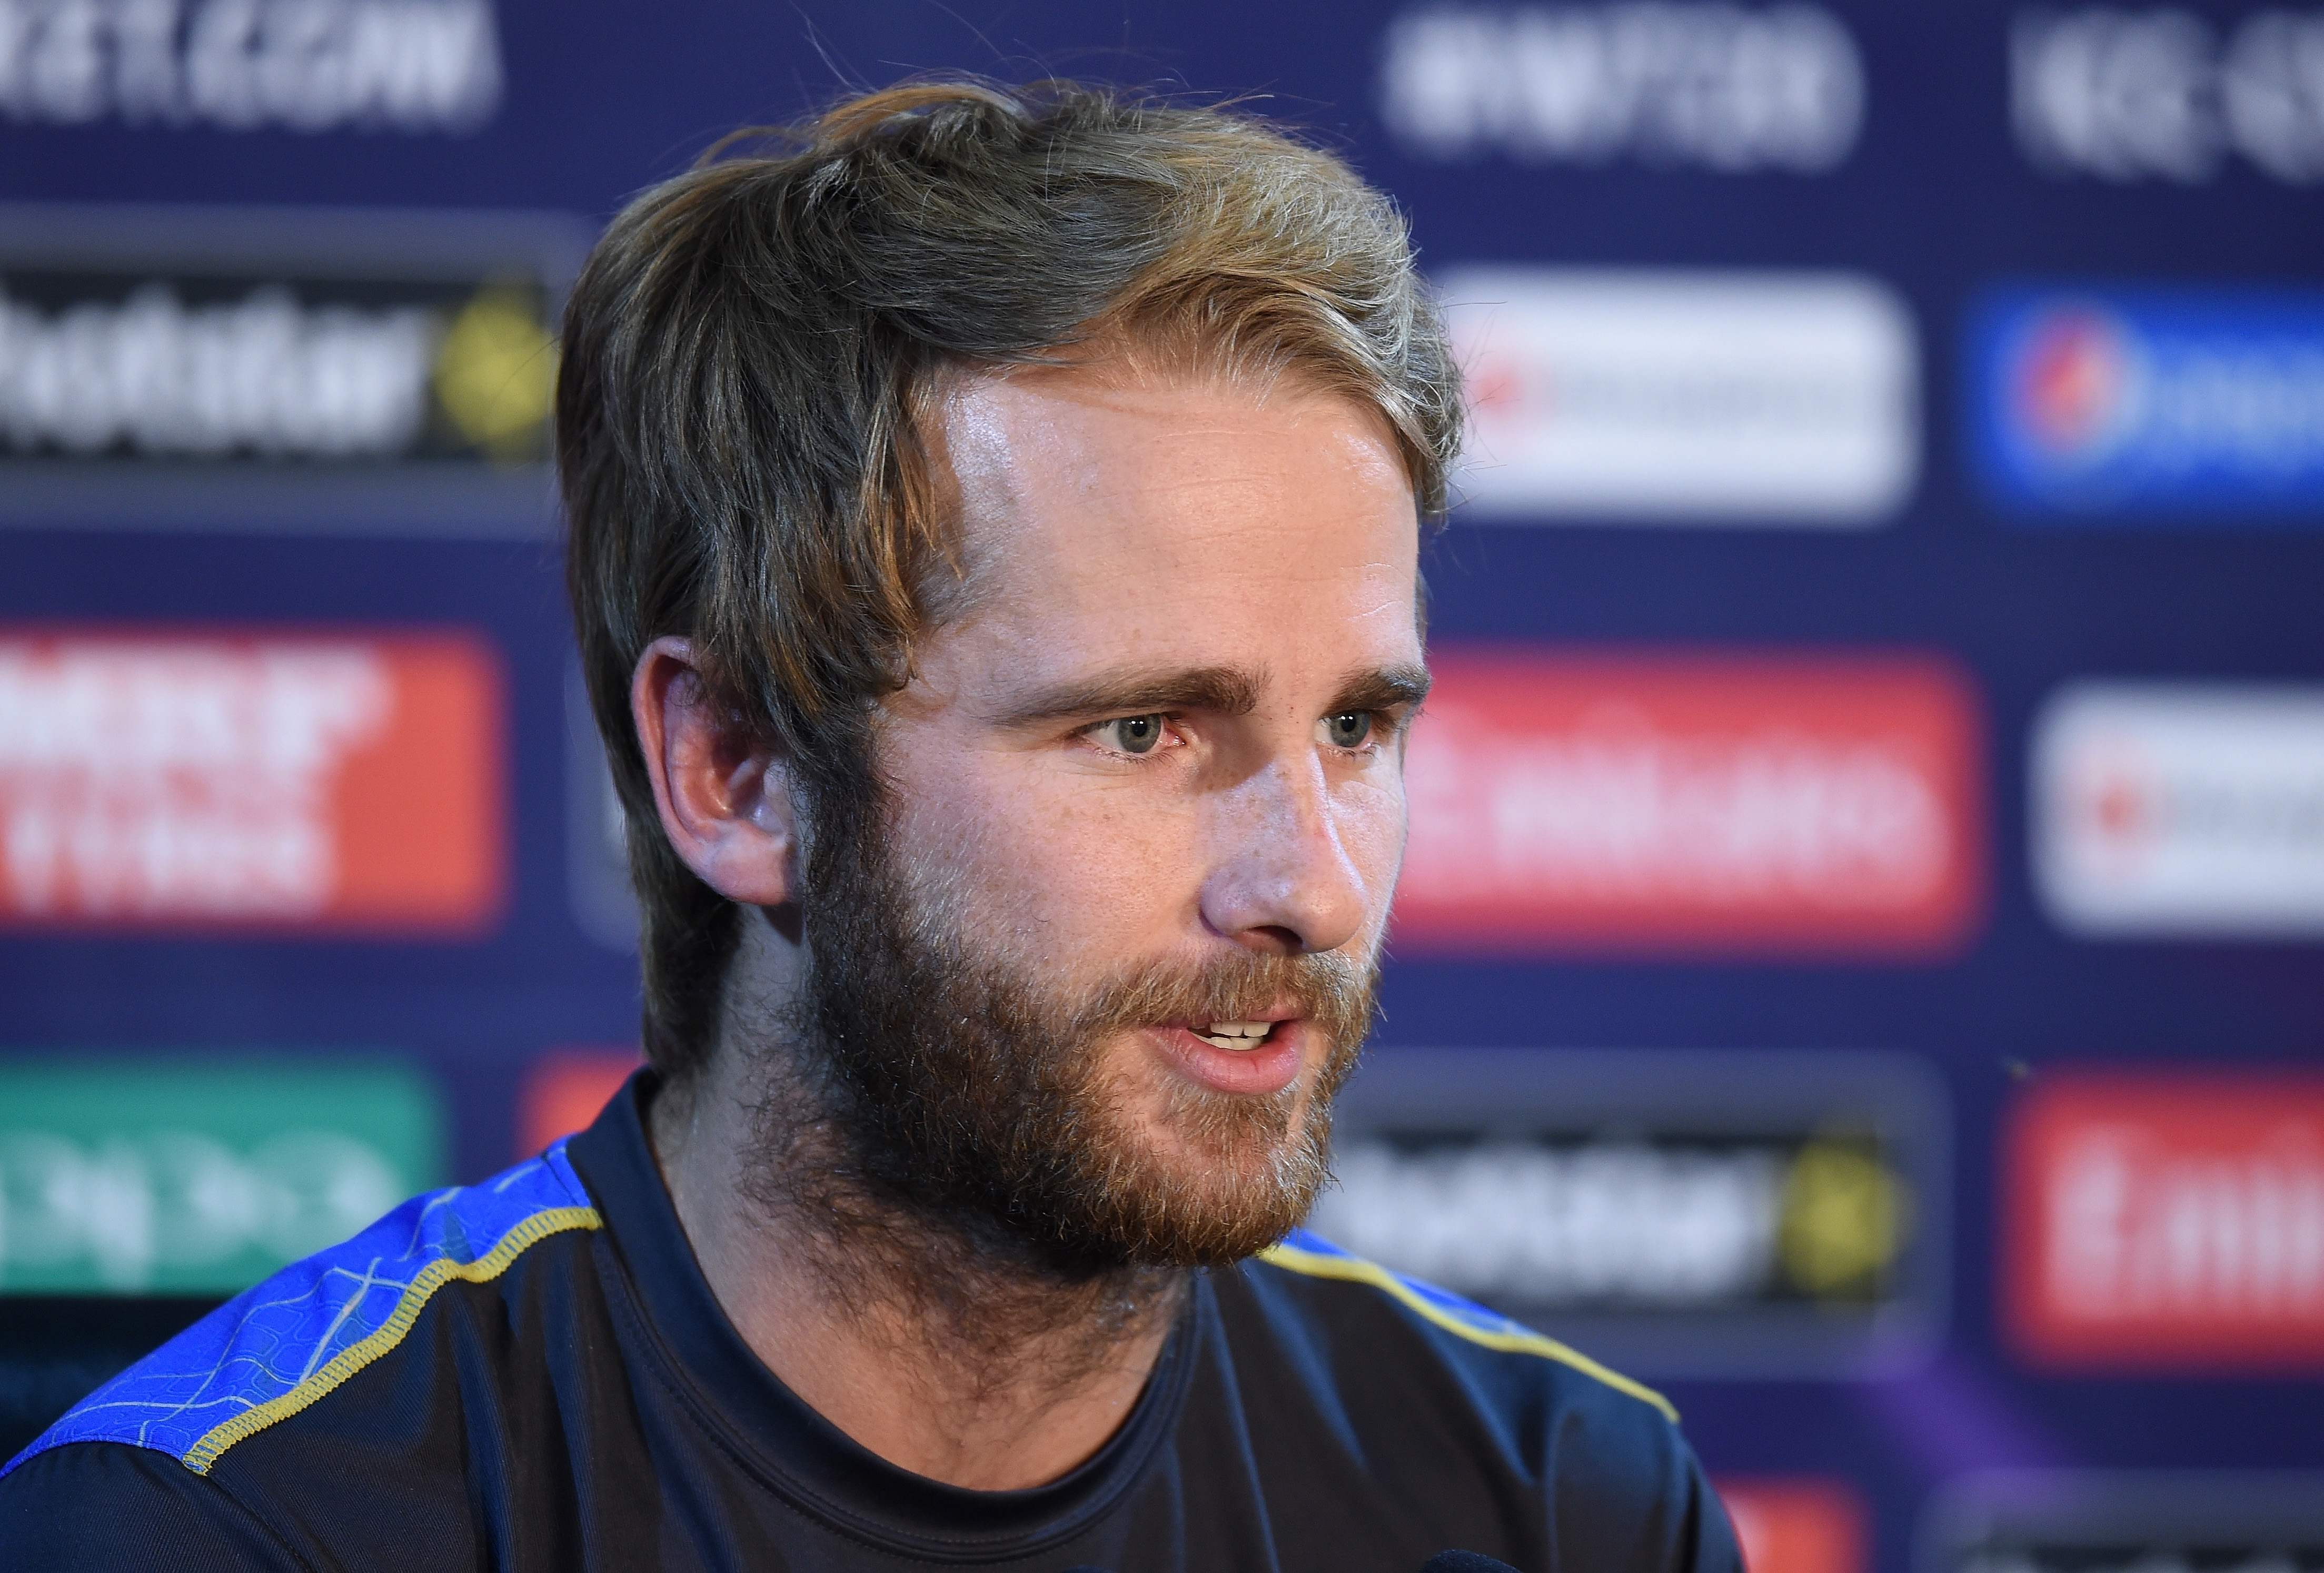 In-form New Zealand will stay grounded against England: Williamson